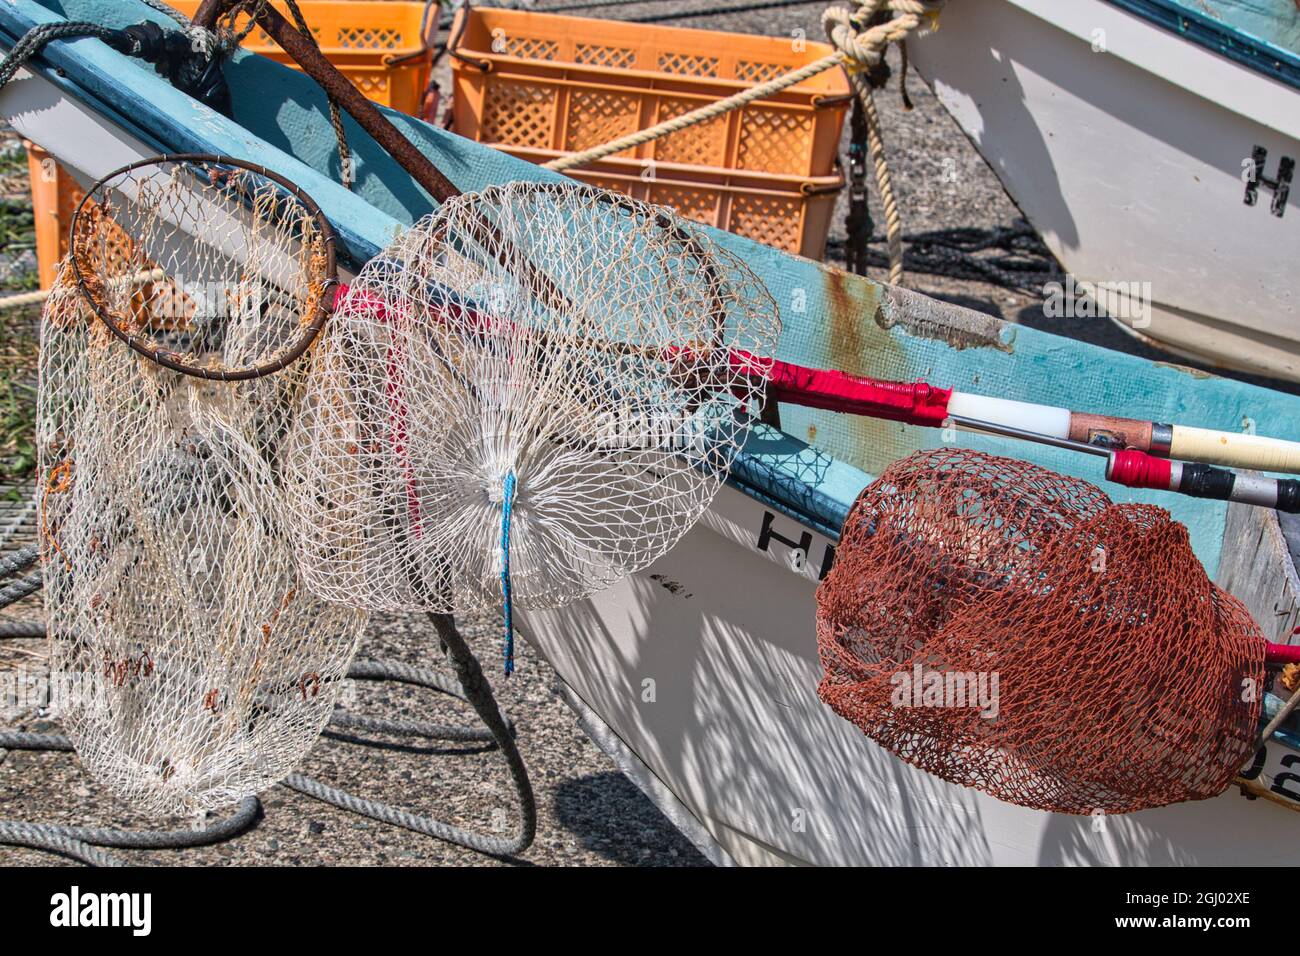 Three commercial landing nets used for fishing rest on a blue and